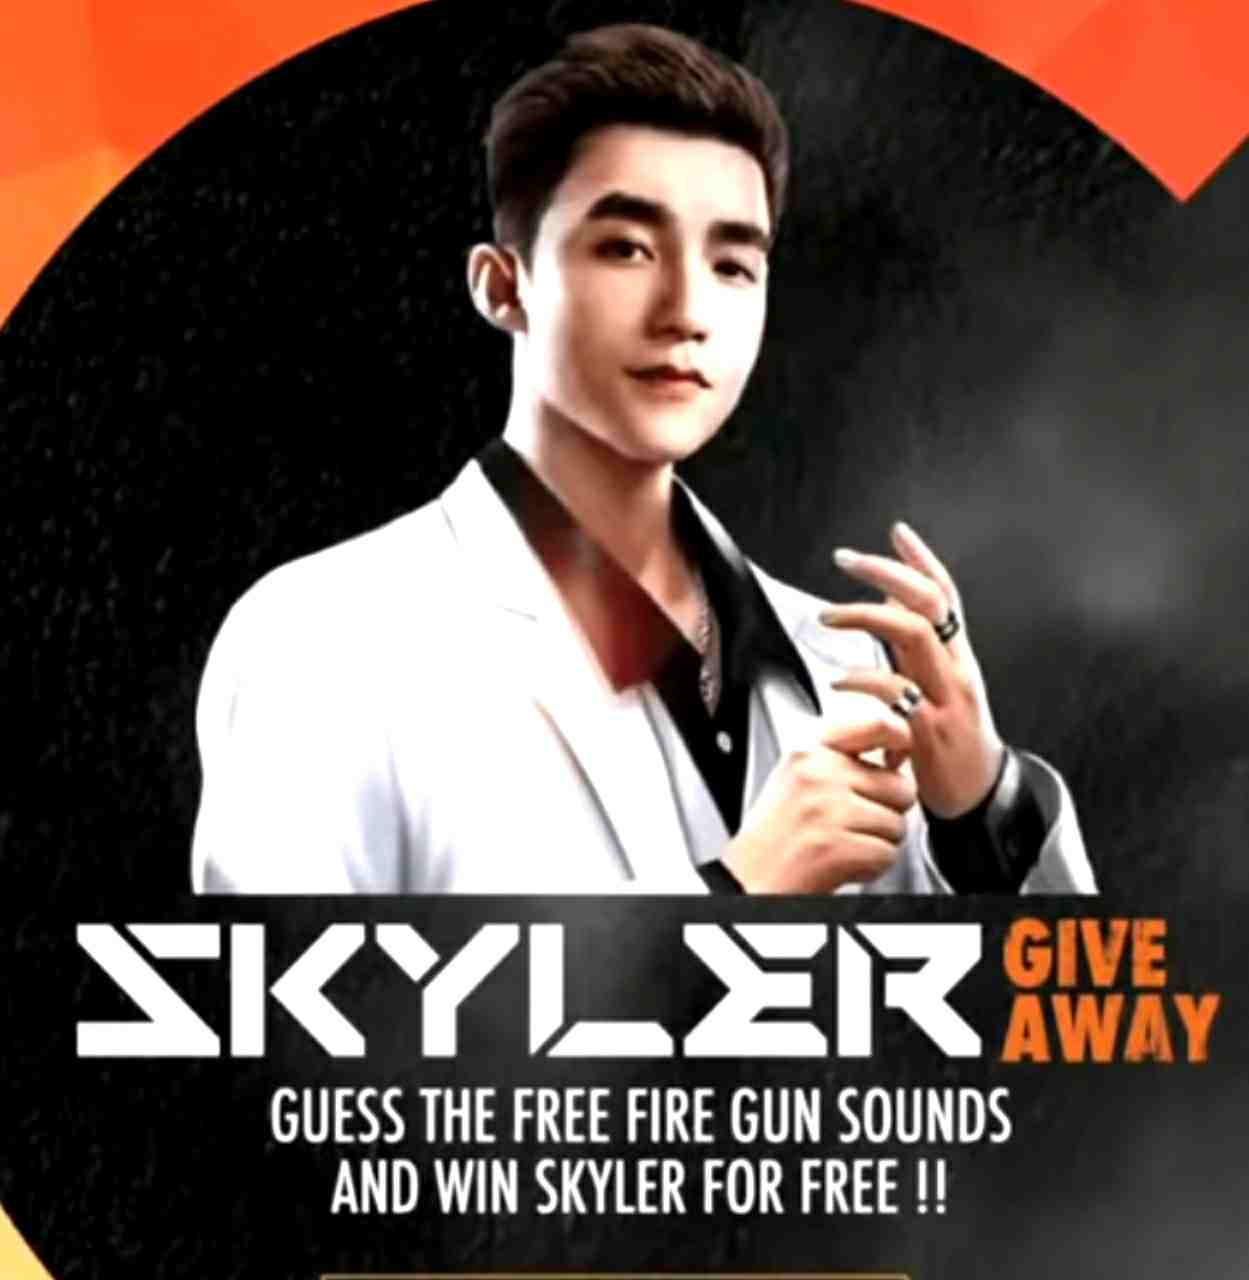 Free Fire Skyler Character Giveaway: How To Get Skyler Character For Free?